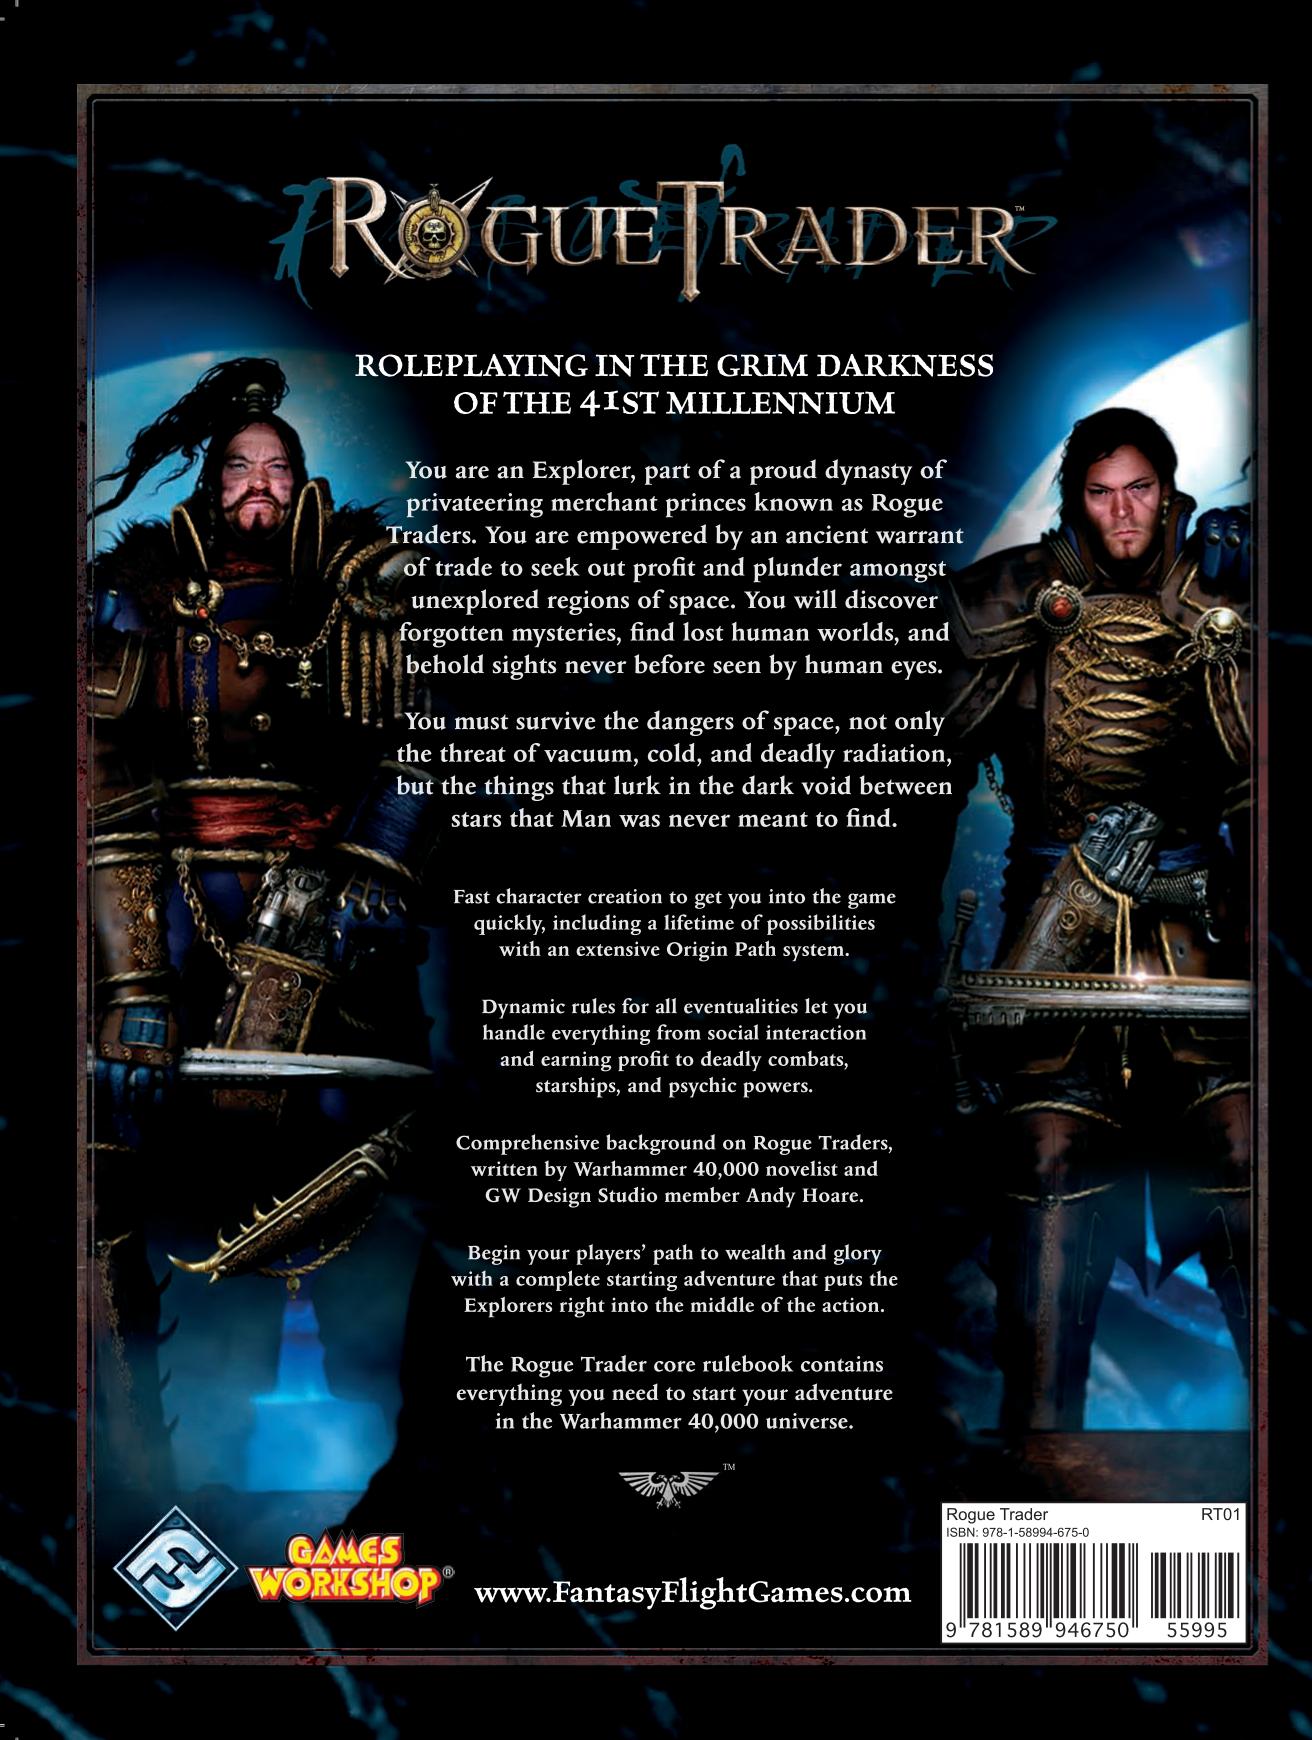 torrent of rogue trader movie